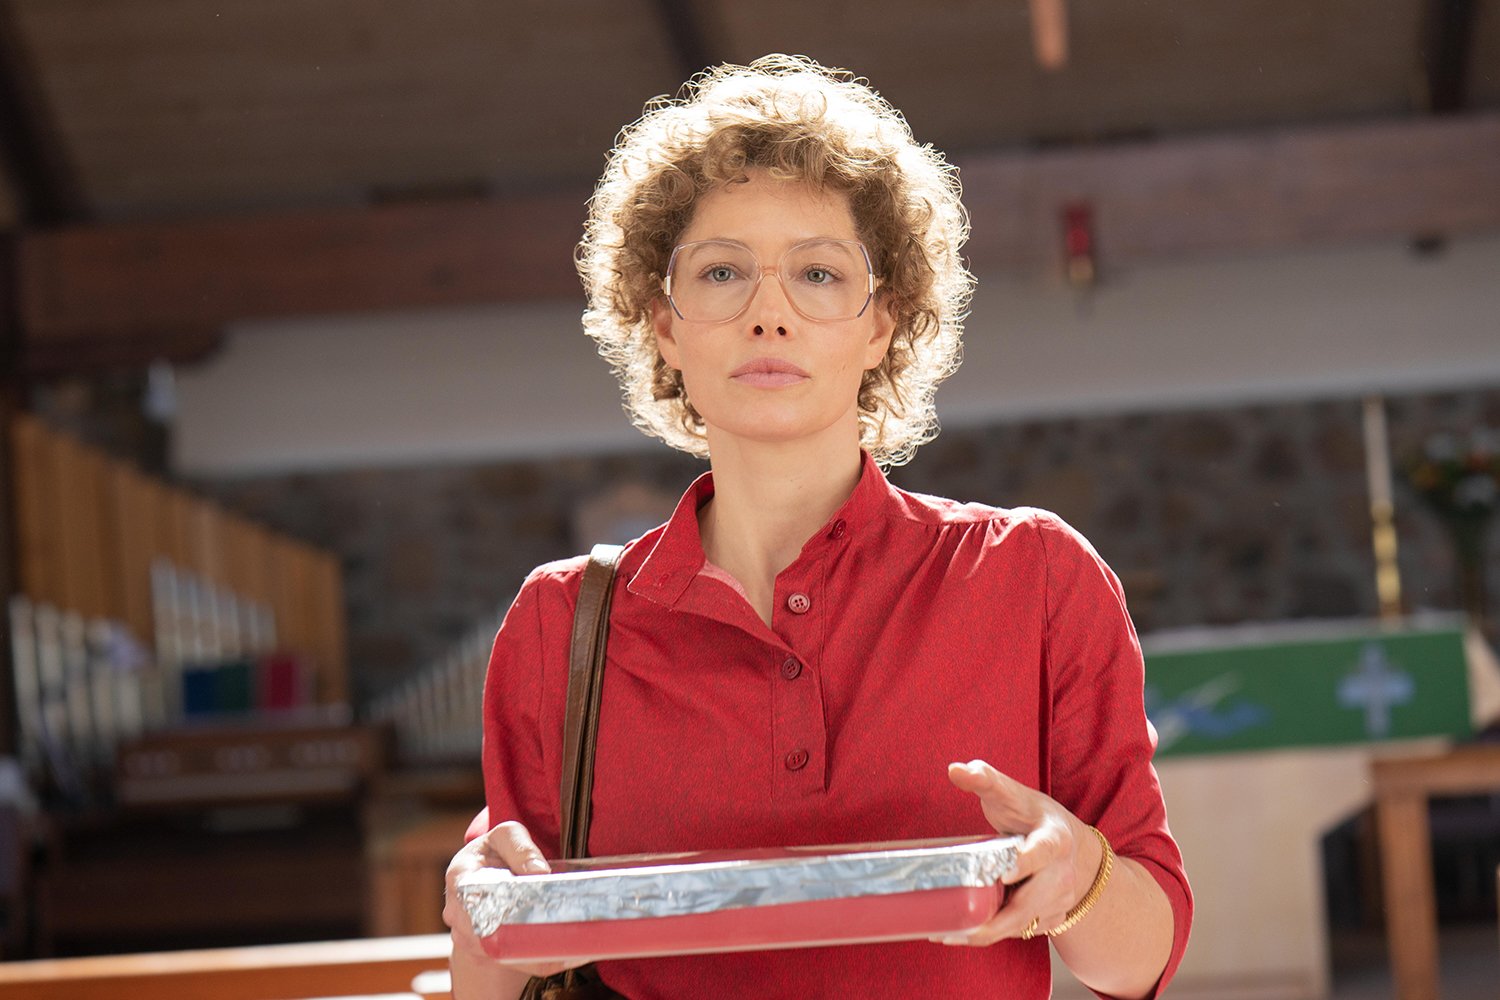 Jessica Biel wearing a red shirt and holding a dish in a production still of Hulu's Candy.